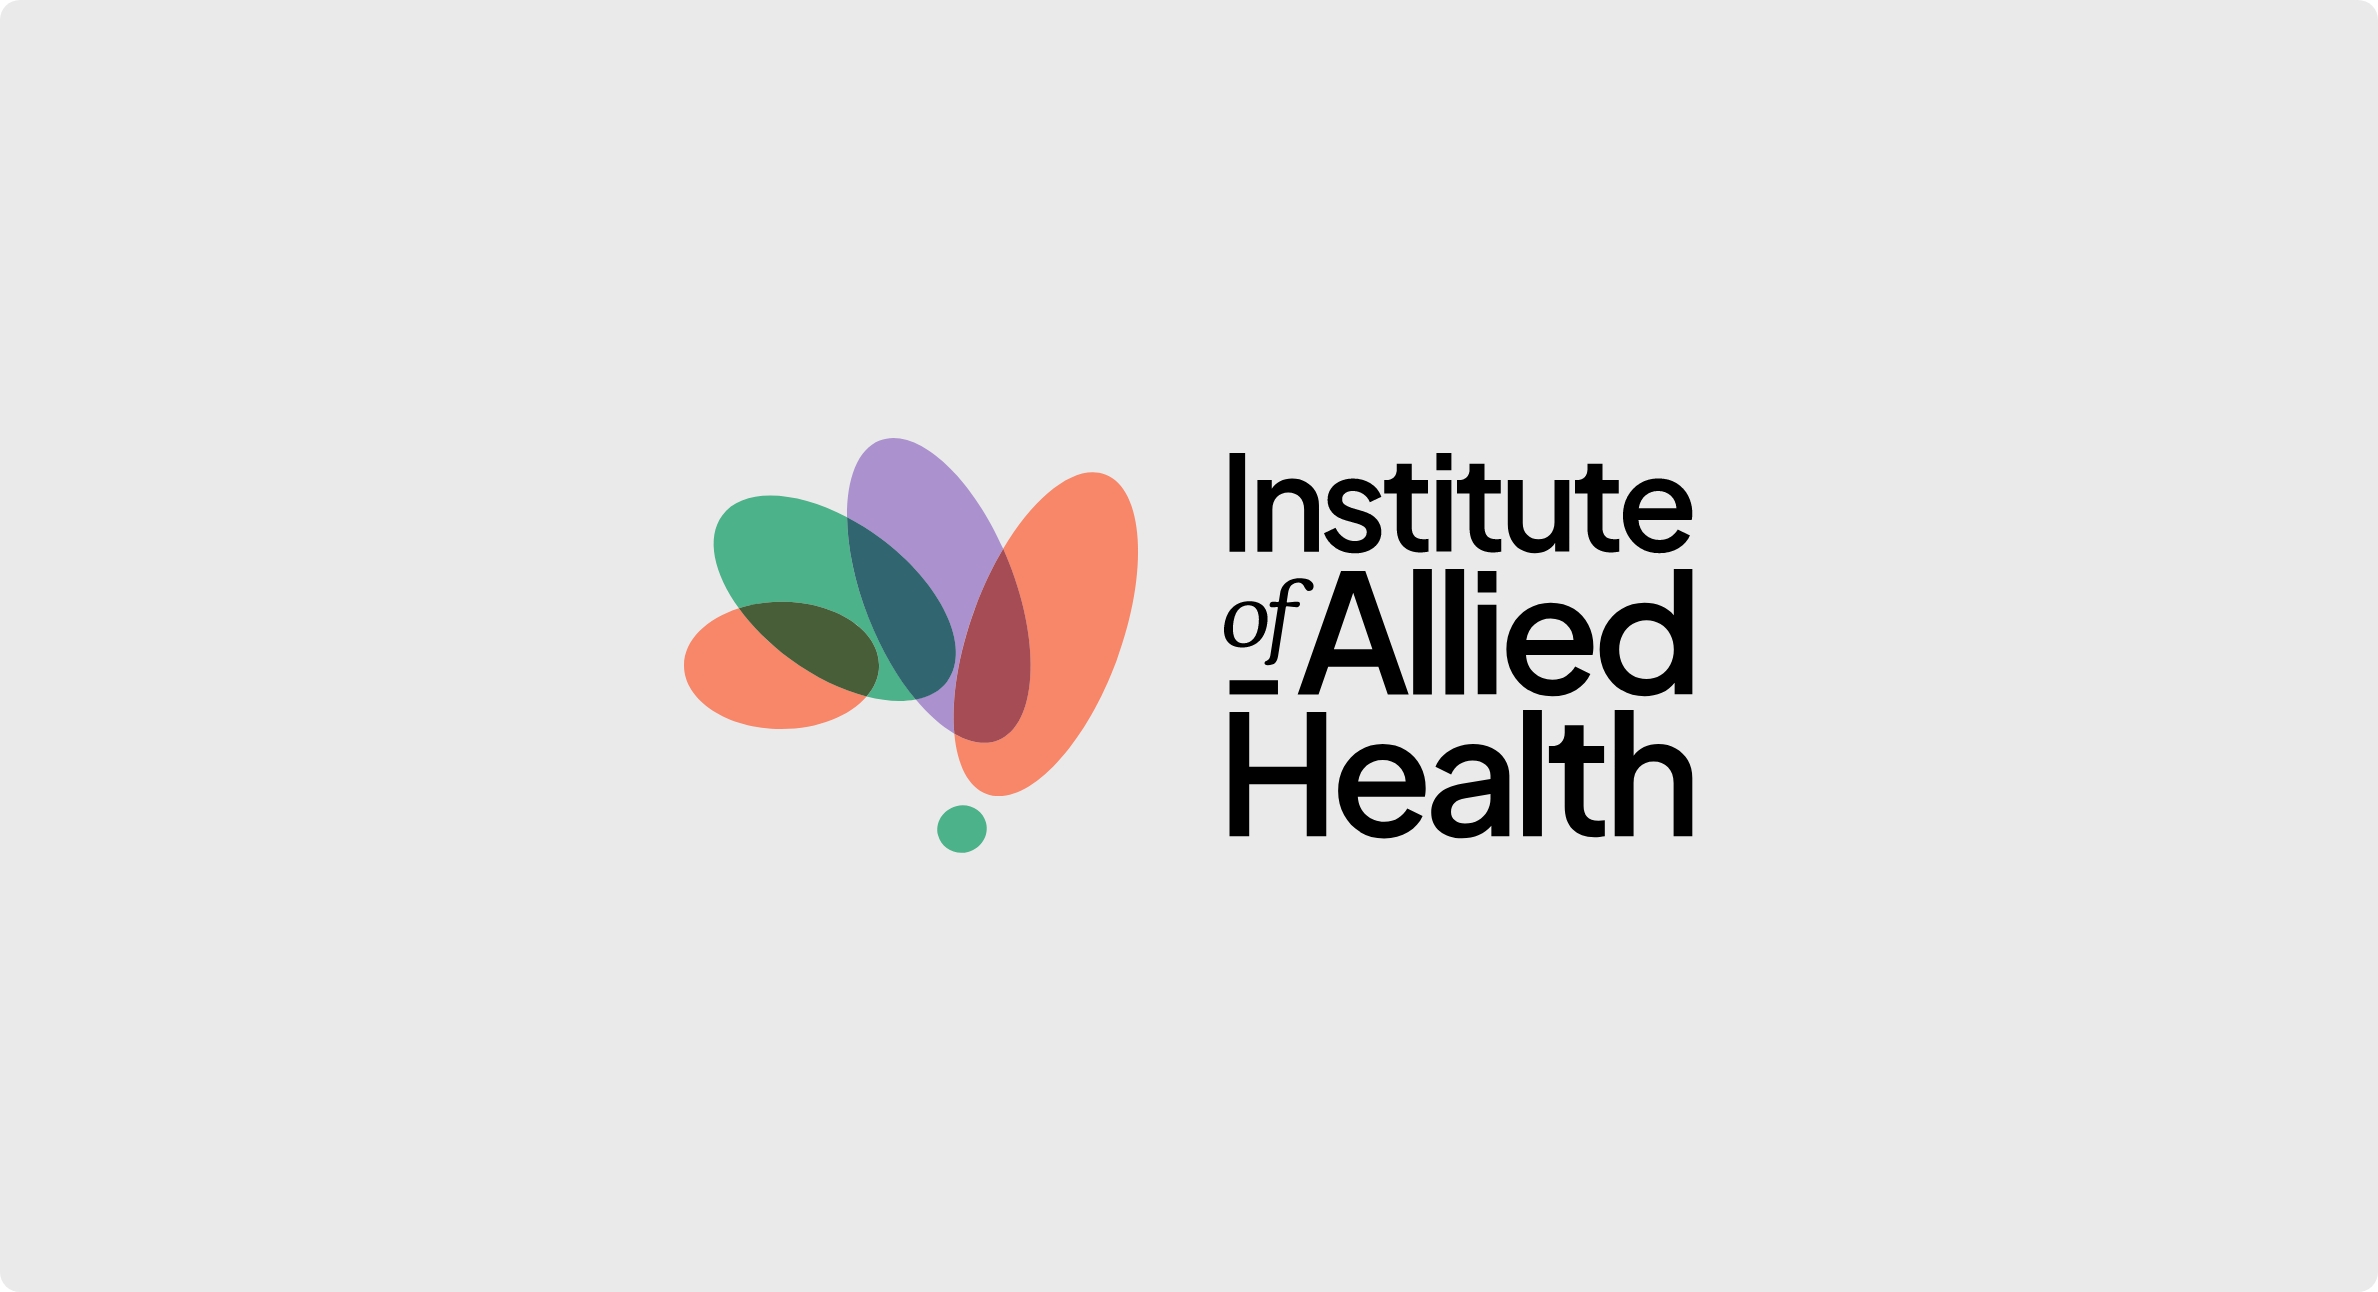 Institute of Allied Health